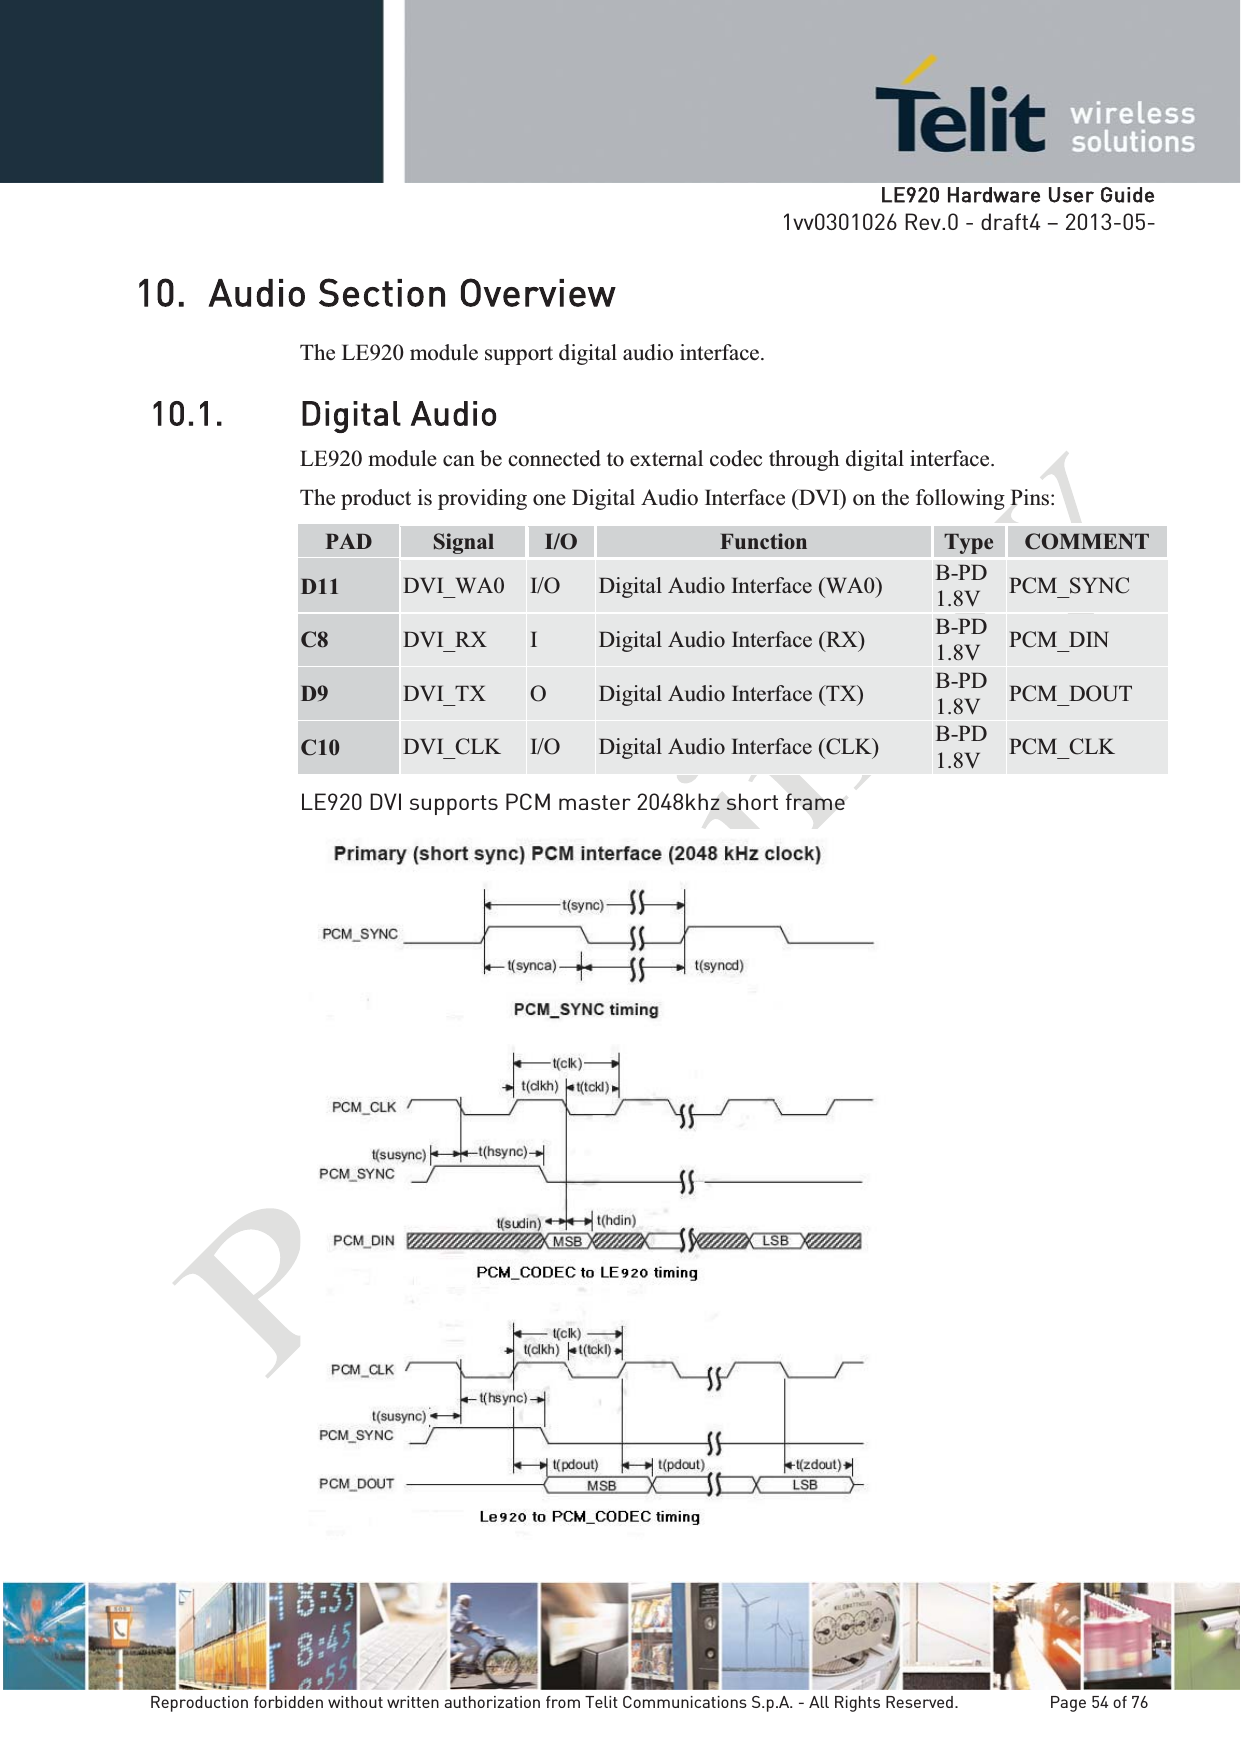   LLE920 Hardware User Guide1vv0301026 Rev.0 - draft4 – 2013-05-Reproduction forbidden without written authorization from Telit Communications S.p.A. - All Rights Reserved.    Page 54 of 76 10. Audio Section Overview  The LE920 module support digital audio interface. 10.1. Digital Audio LE920 module can be connected to external codec through digital interface. The product is providing one Digital Audio Interface (DVI) on the following Pins: PAD  Signal  I/O  Function  Type  COMMENT D11 DVI_WA0  I/O  Digital Audio Interface (WA0)  B-PD 1.8V  PCM_SYNC C8  DVI_RX  I  Digital Audio Interface (RX)  B-PD 1.8V  PCM_DIN D9  DVI_TX  O  Digital Audio Interface (TX)  B-PD 1.8V  PCM_DOUT C10  DVI_CLK  I/O  Digital Audio Interface (CLK)  B-PD 1.8V  PCM_CLK LE920 DVI supports PCM master 2048khz short frame    